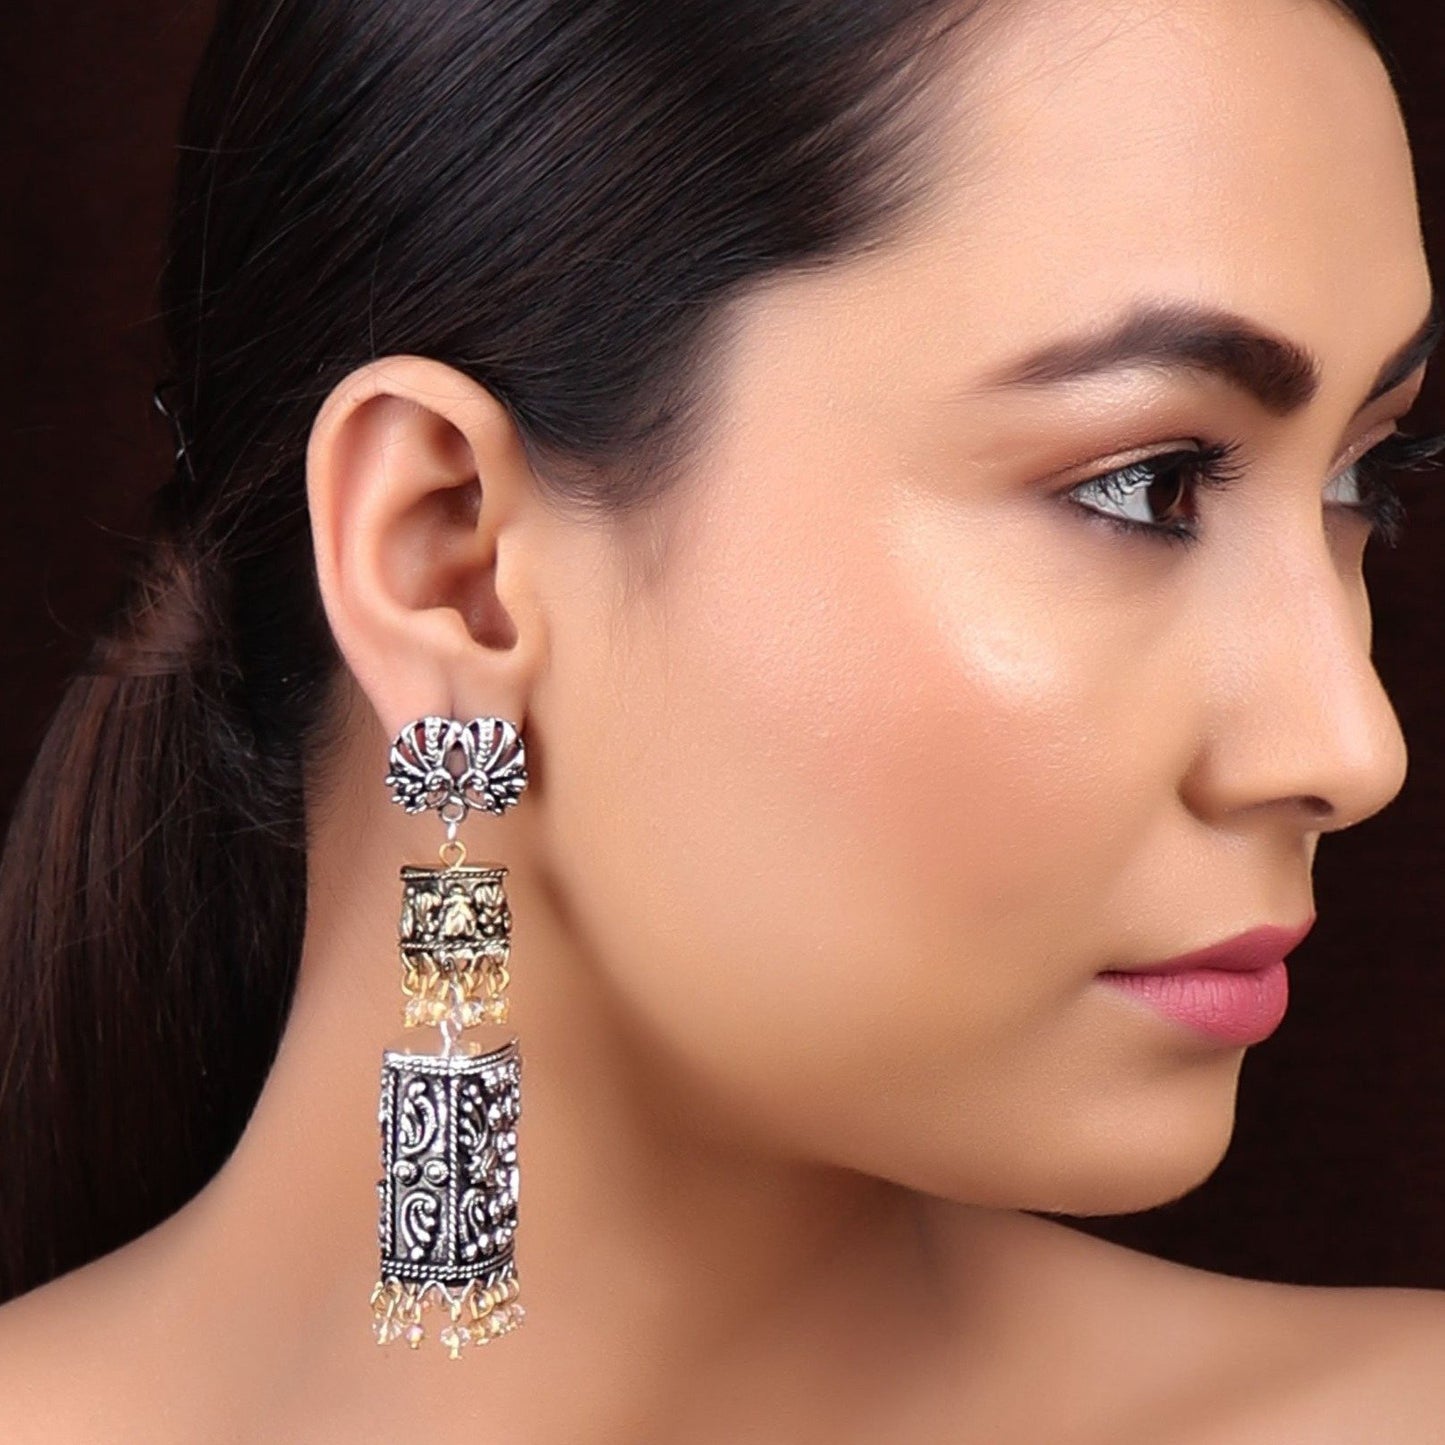 Earrings,The spirited Peacock Pair Earring in Transparent Beads - Cippele Multi Store